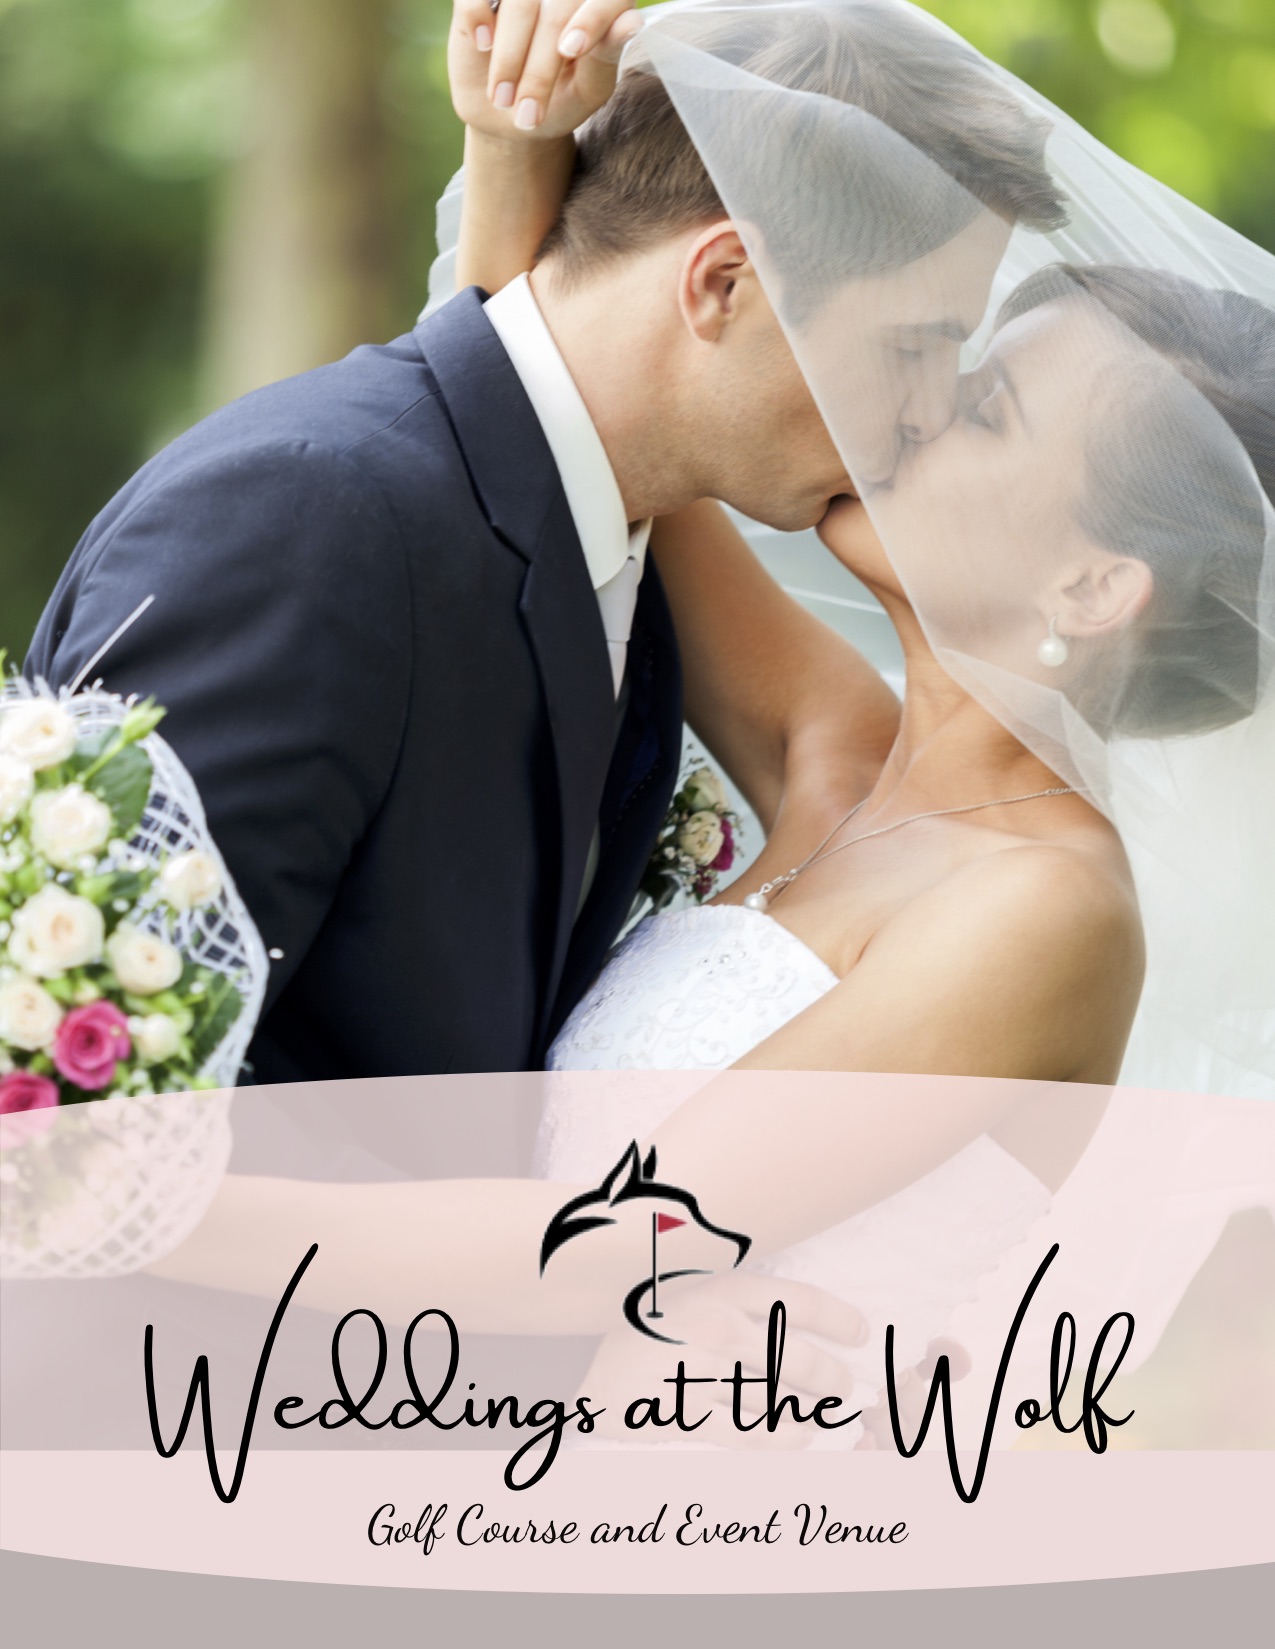 Weddings at the Wolf PDF